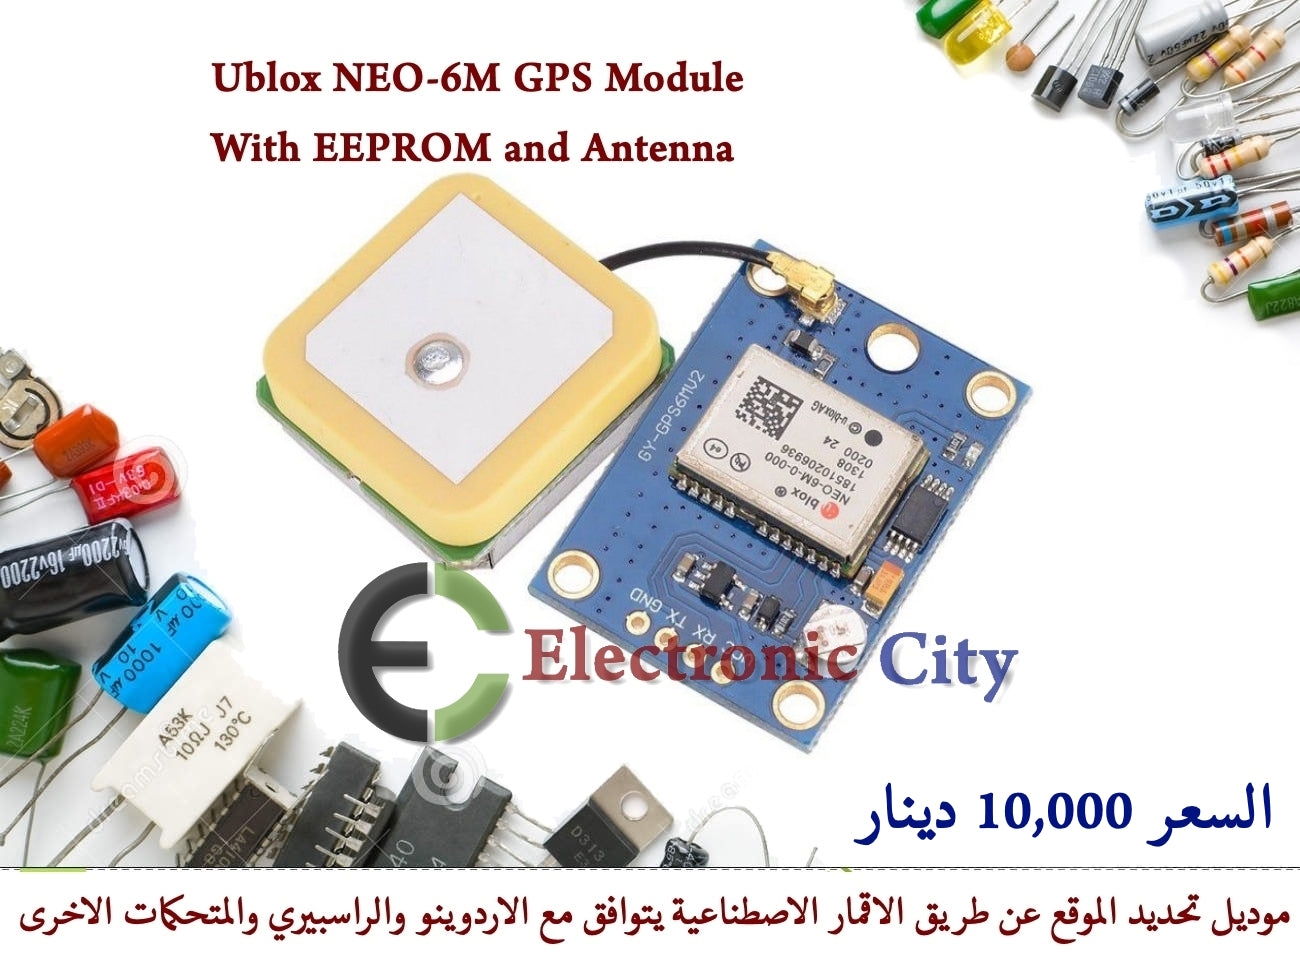 Ublox NEO-6M GPS Module with EEPROM and Antenna #S7 010041